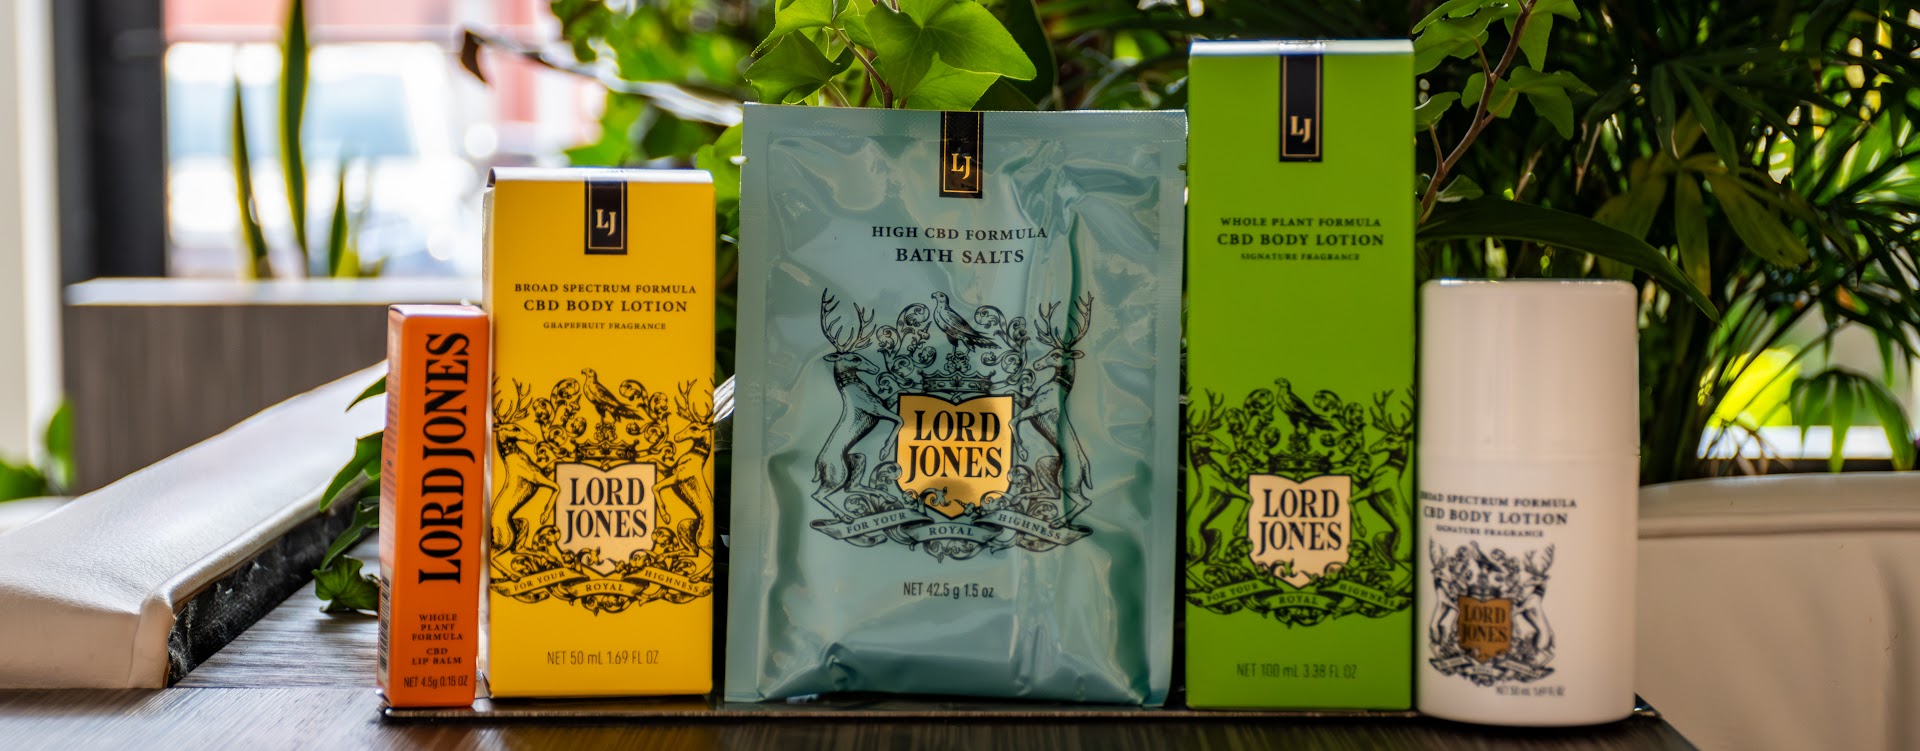 Experience Wellness & Luxury with Lord Jones CBD Products